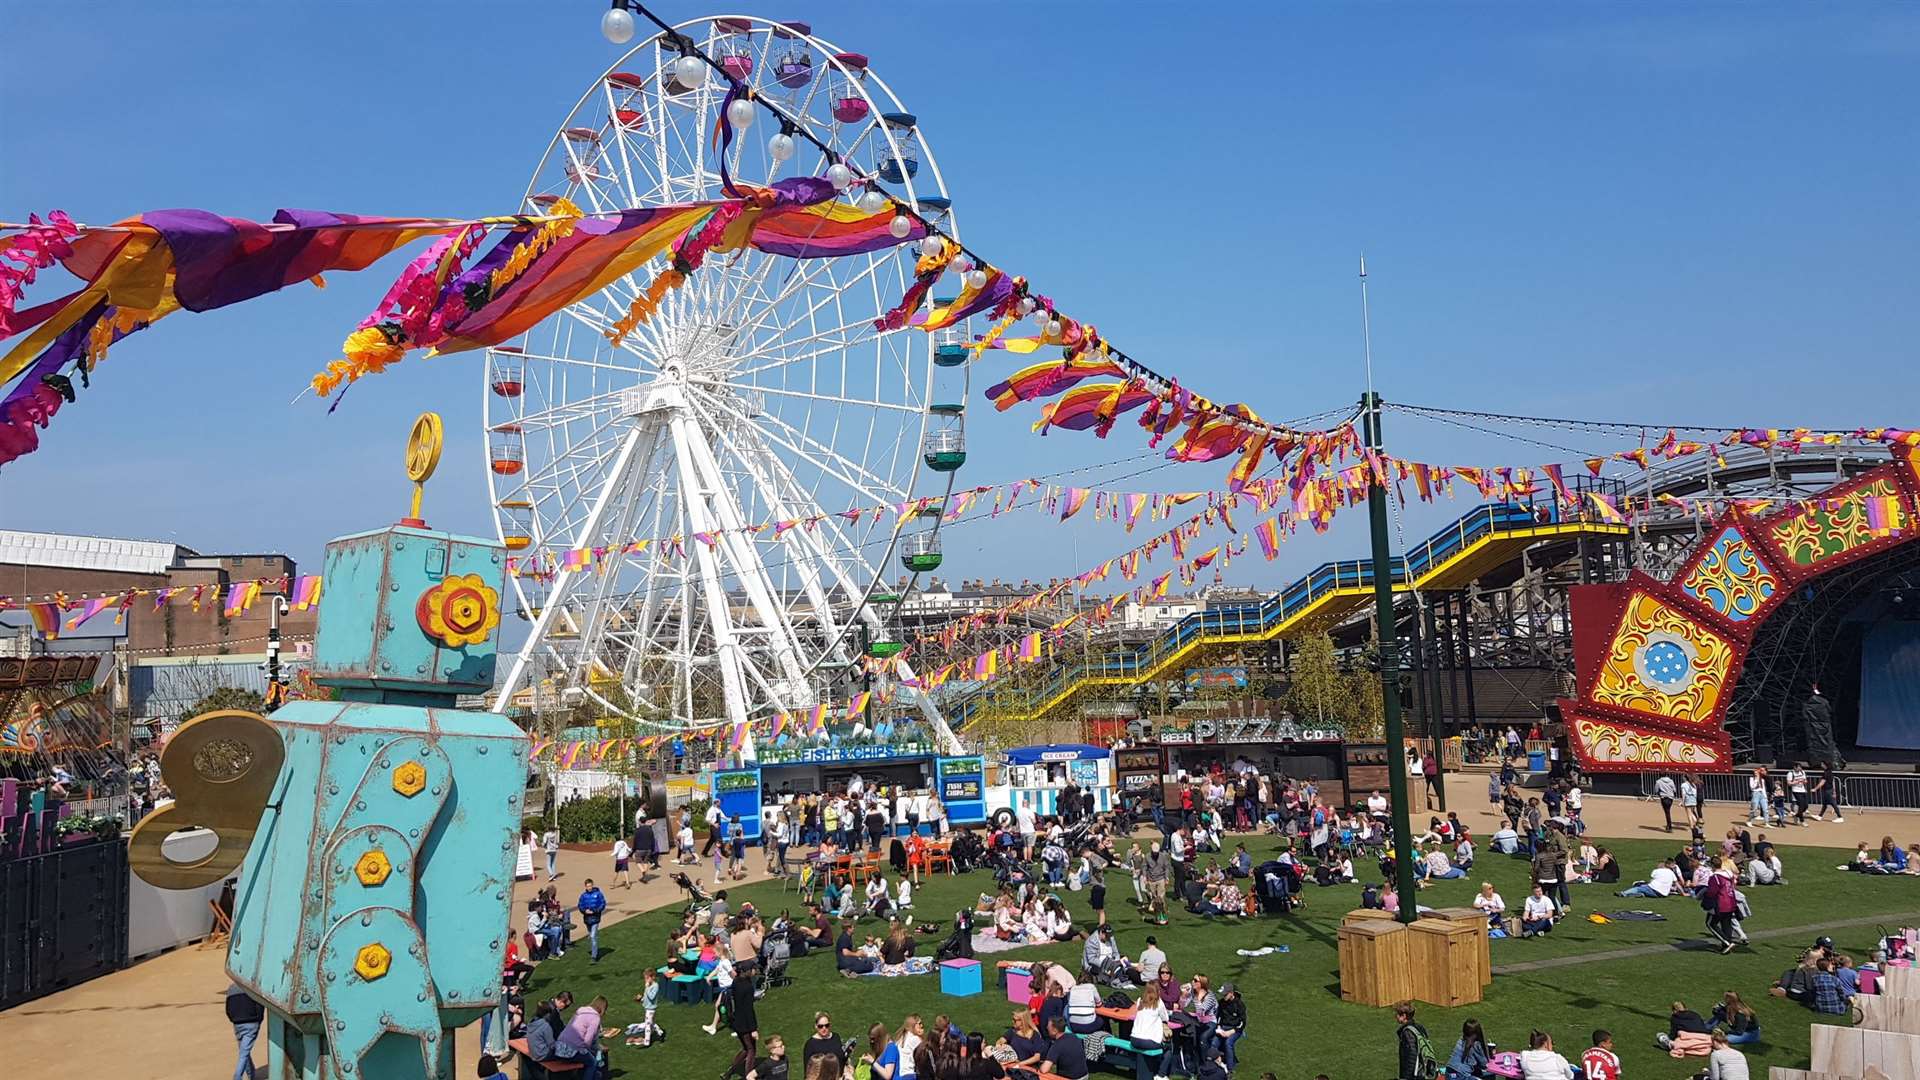 Dreamland is enjoying its best opening weekend to date